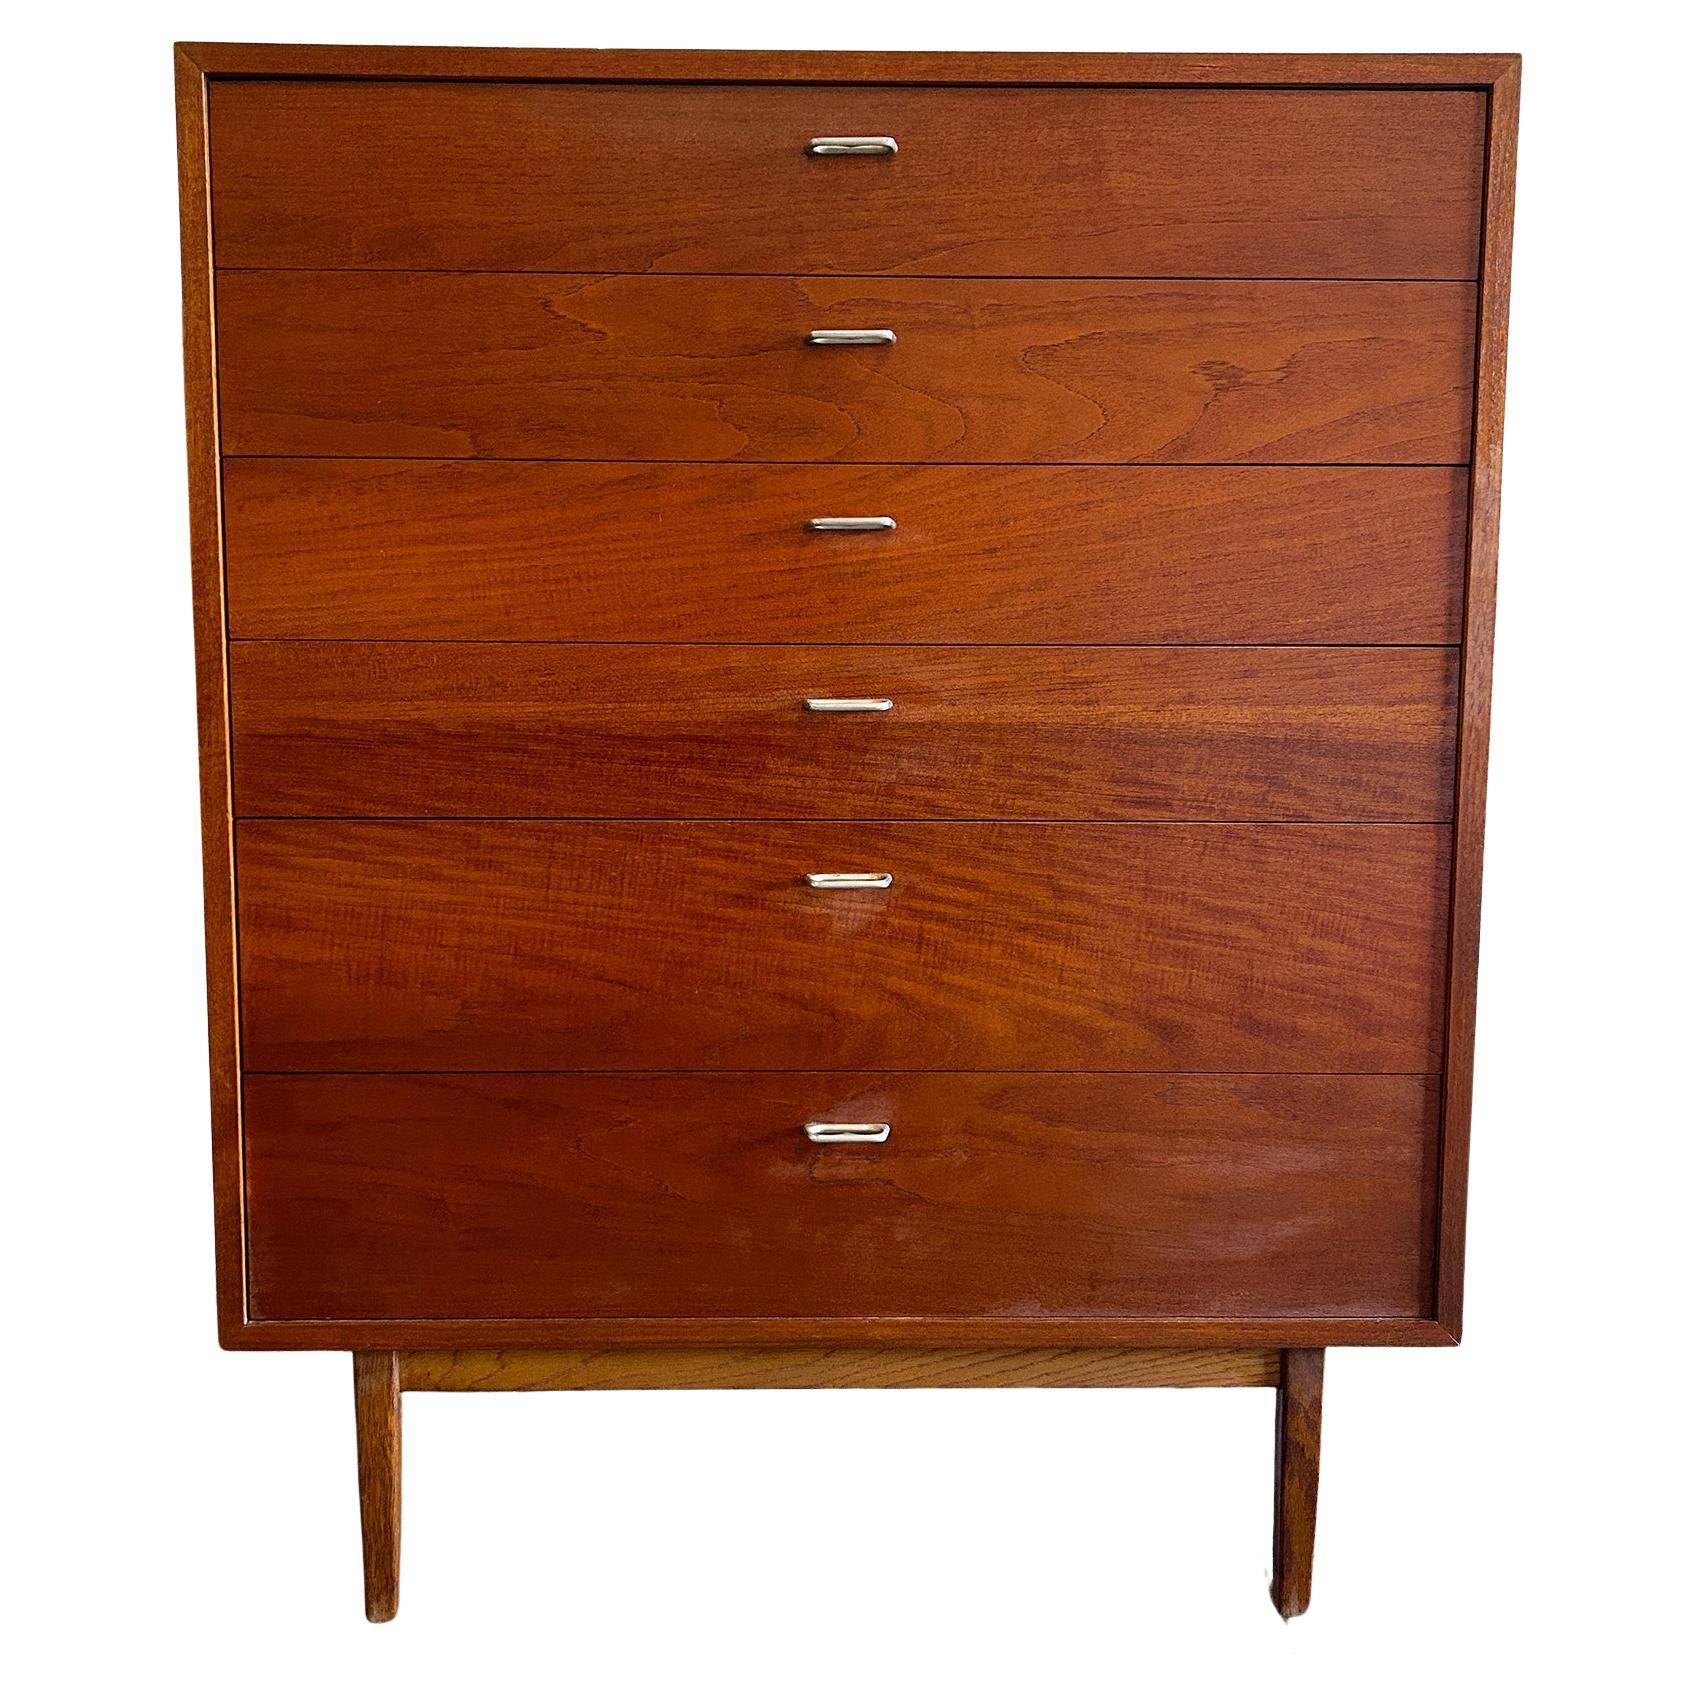 Midcentury Tall 6 Drawer Tall Walnut Dresser with Aluminum Finger Pulls For Sale